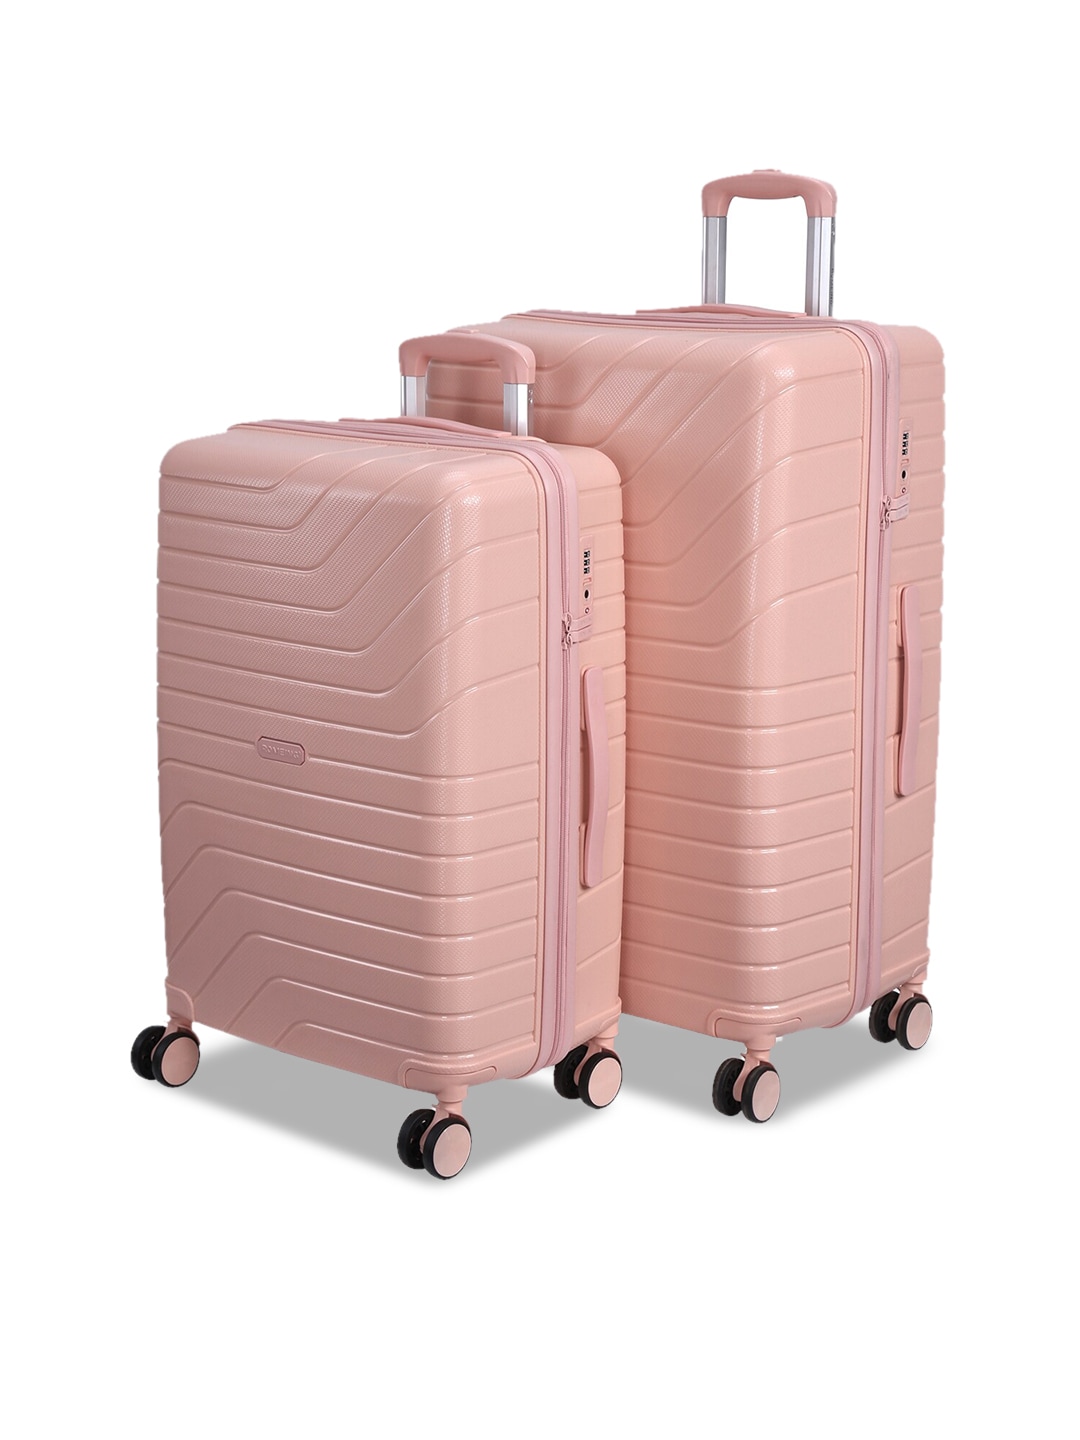 ROMEING Tuscany Set Of 2 Pink Textured Polypropylene Trolley Suitcases Price in India